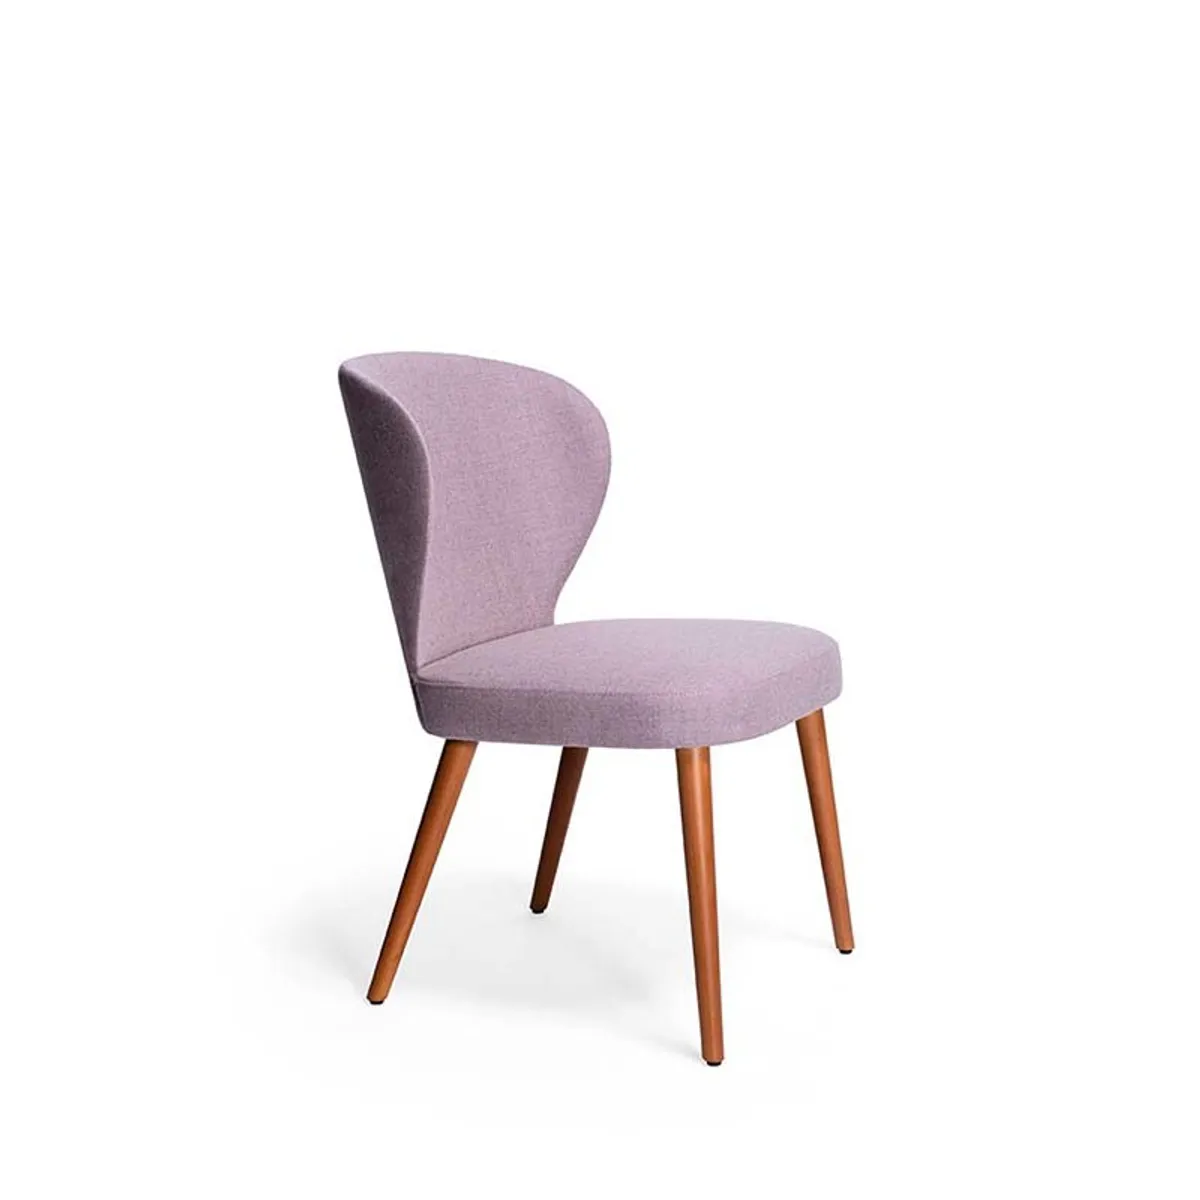 Abbraccio Scl Side Chair Inside Out Contracts